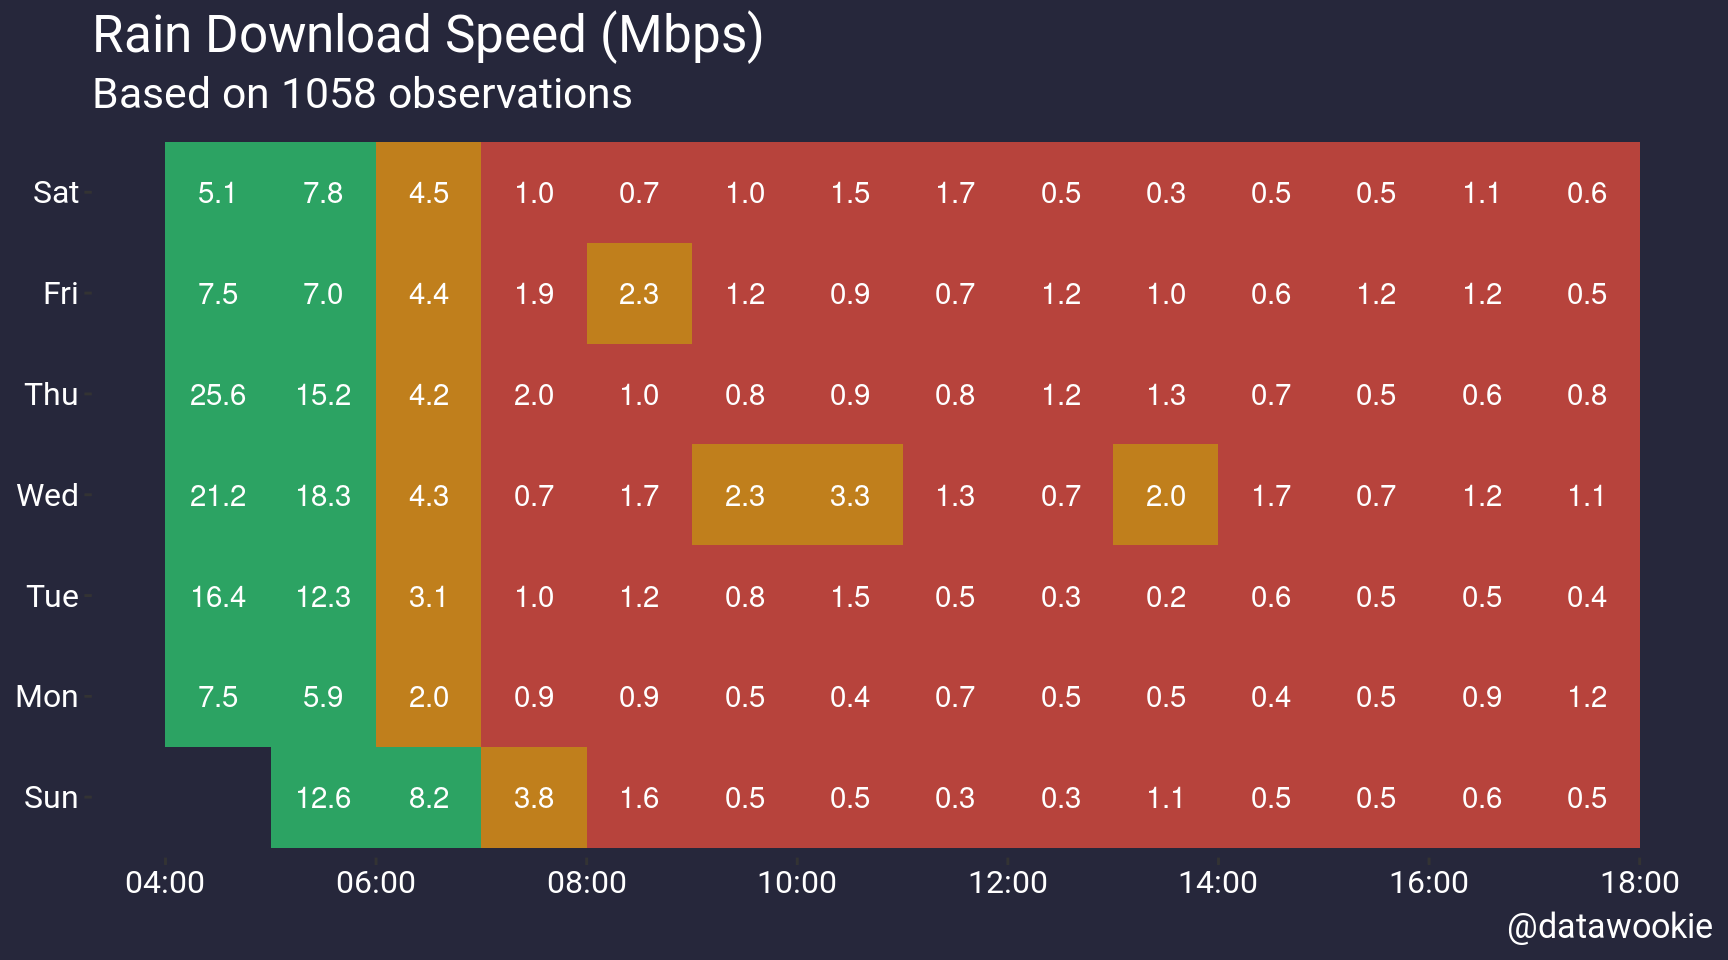 Download speed as a function of day of week and time of day.